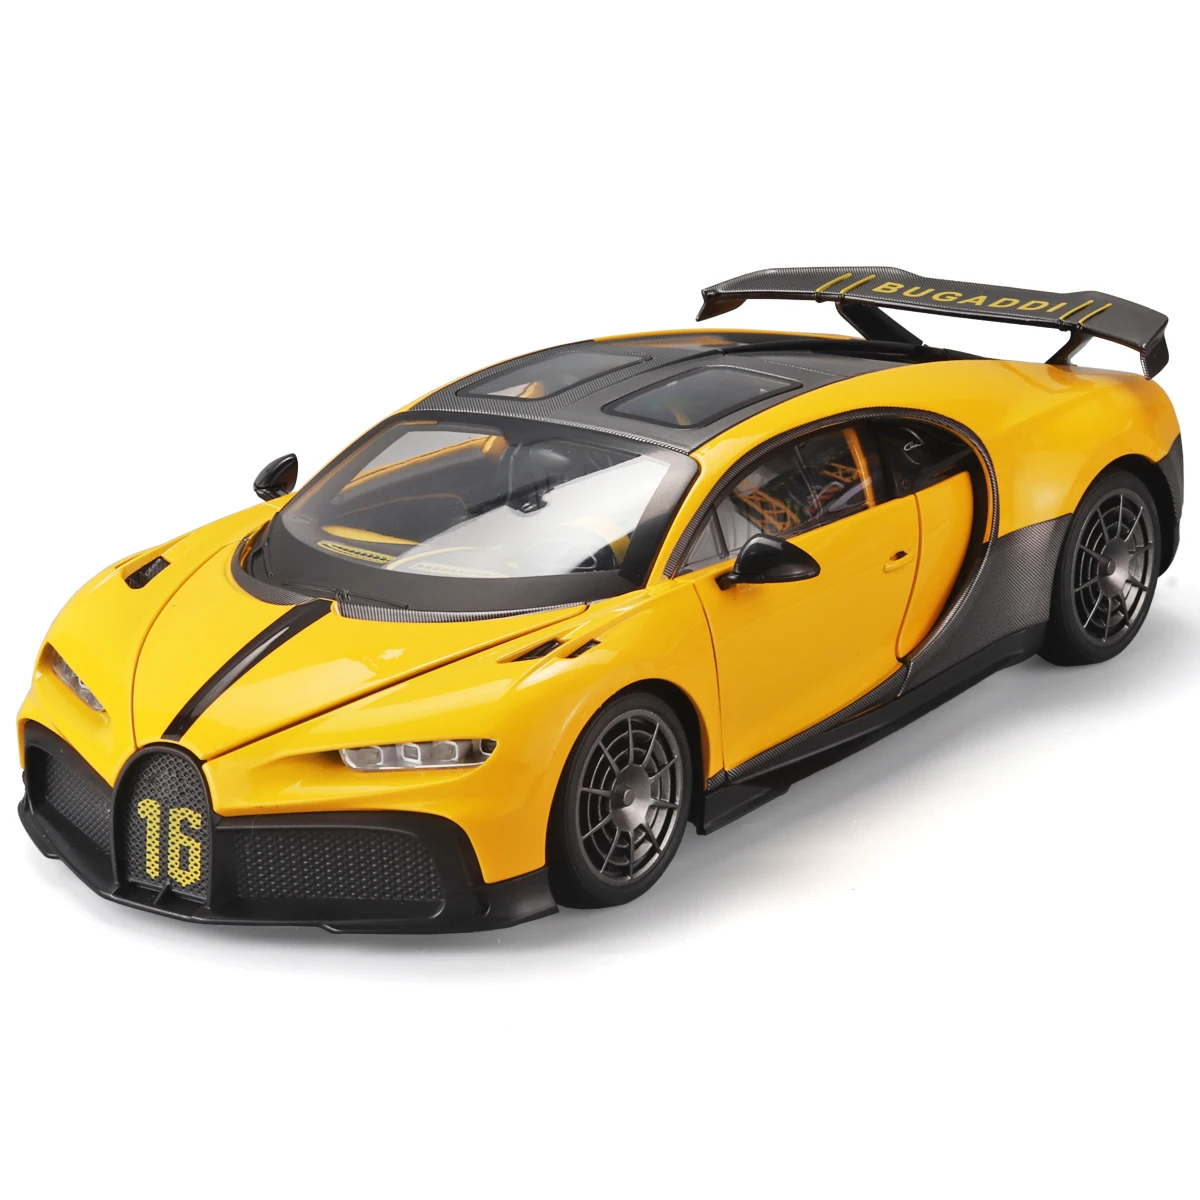 Large 1/18 Scale Chiron Alloy Diecast Car Model Presents For Boyfriend  Sound & Light Toy For Kids Gift Super Sportcar Miniatures - AliExpress